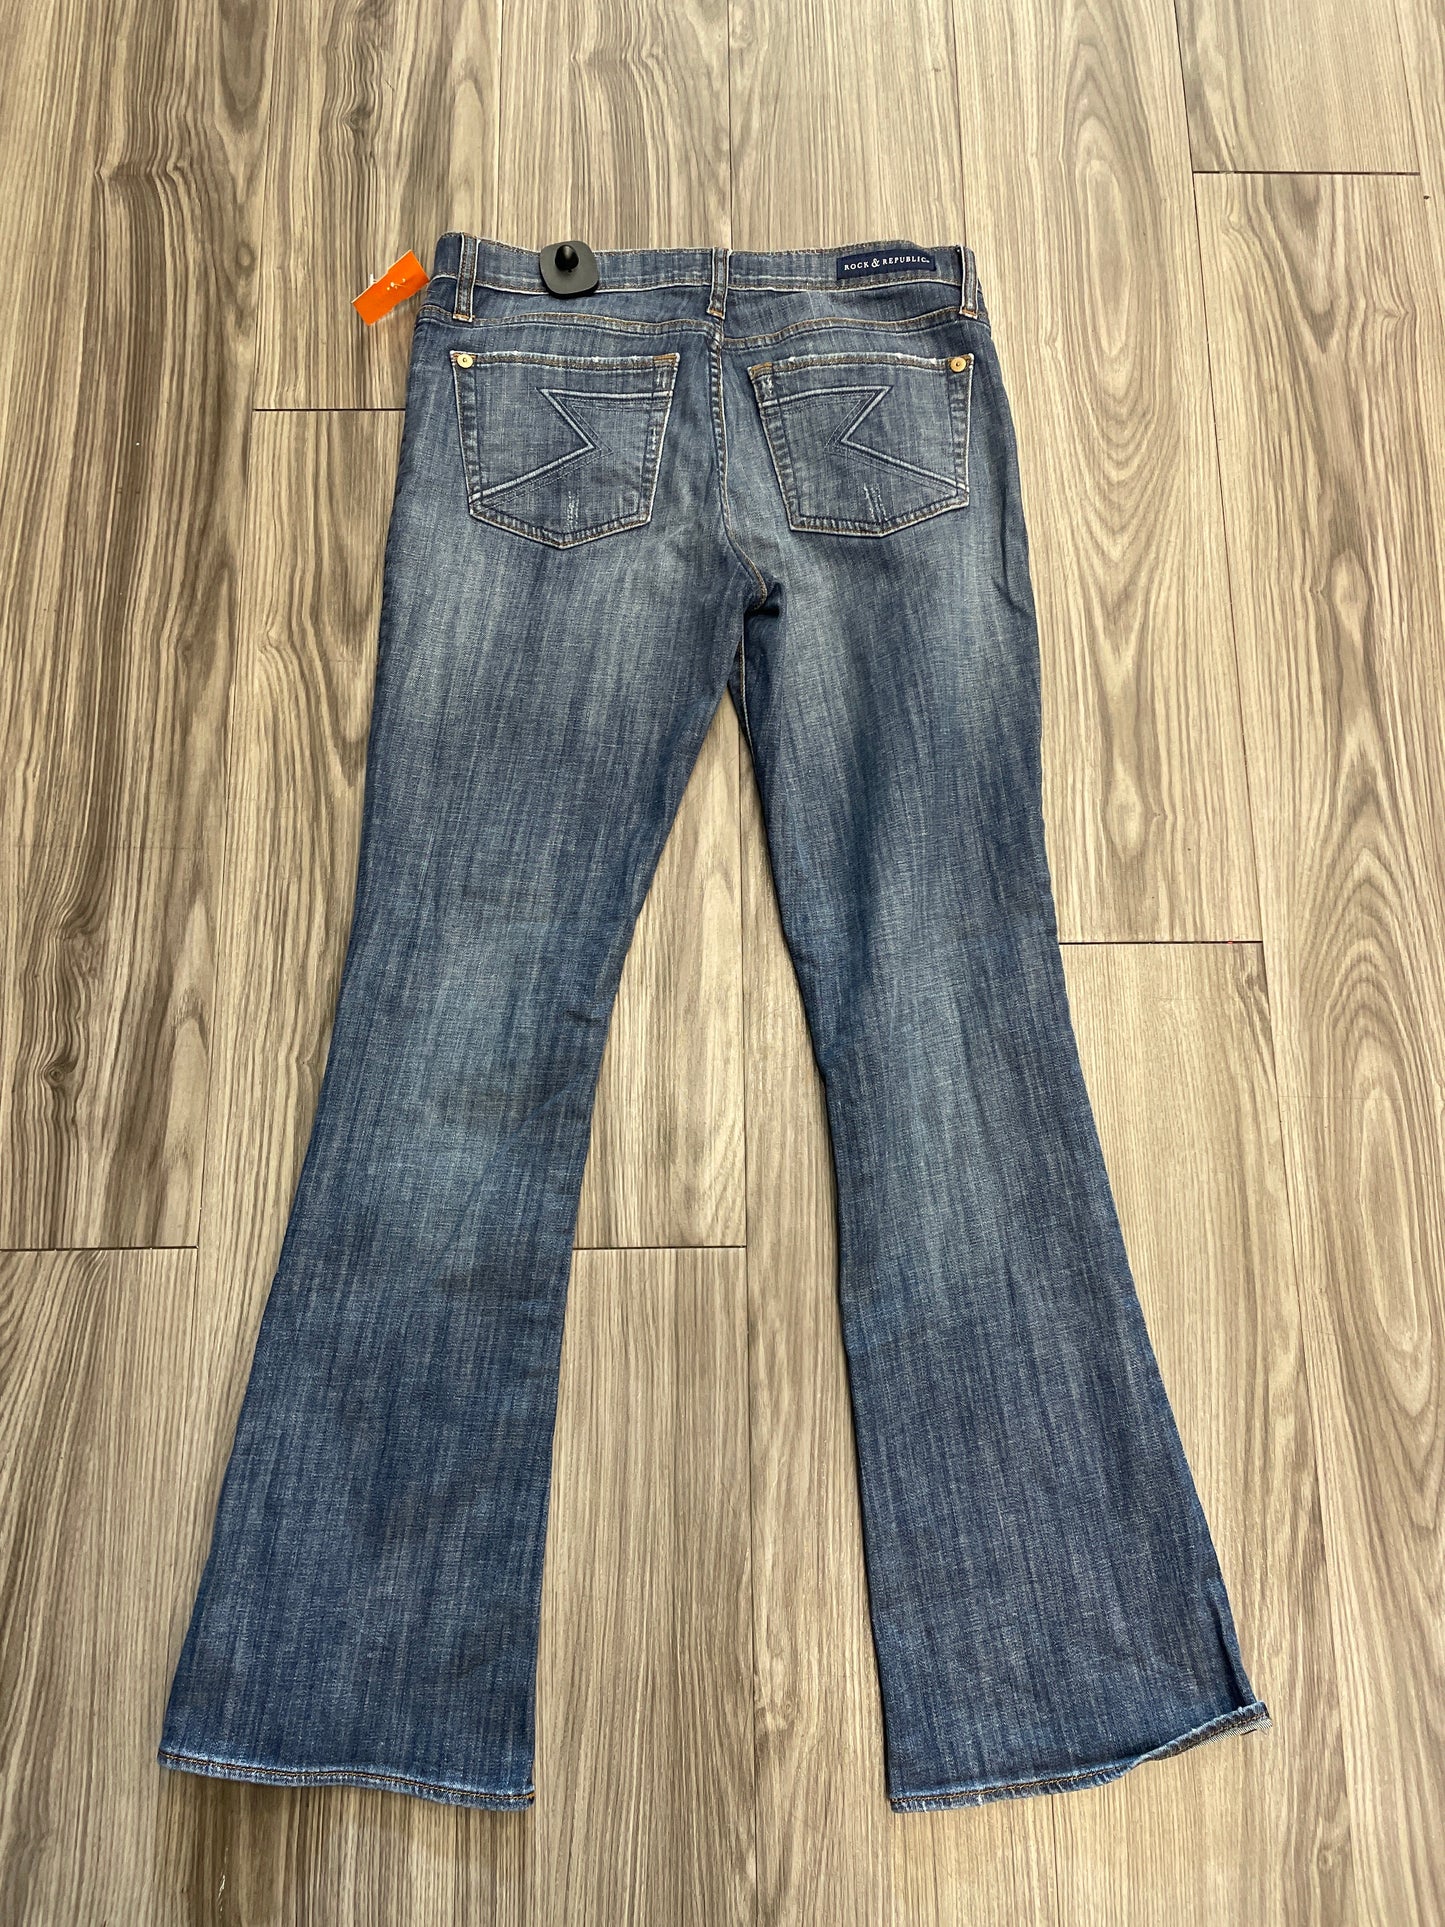 Jeans Boot Cut By Rock And Republic  Size: 12